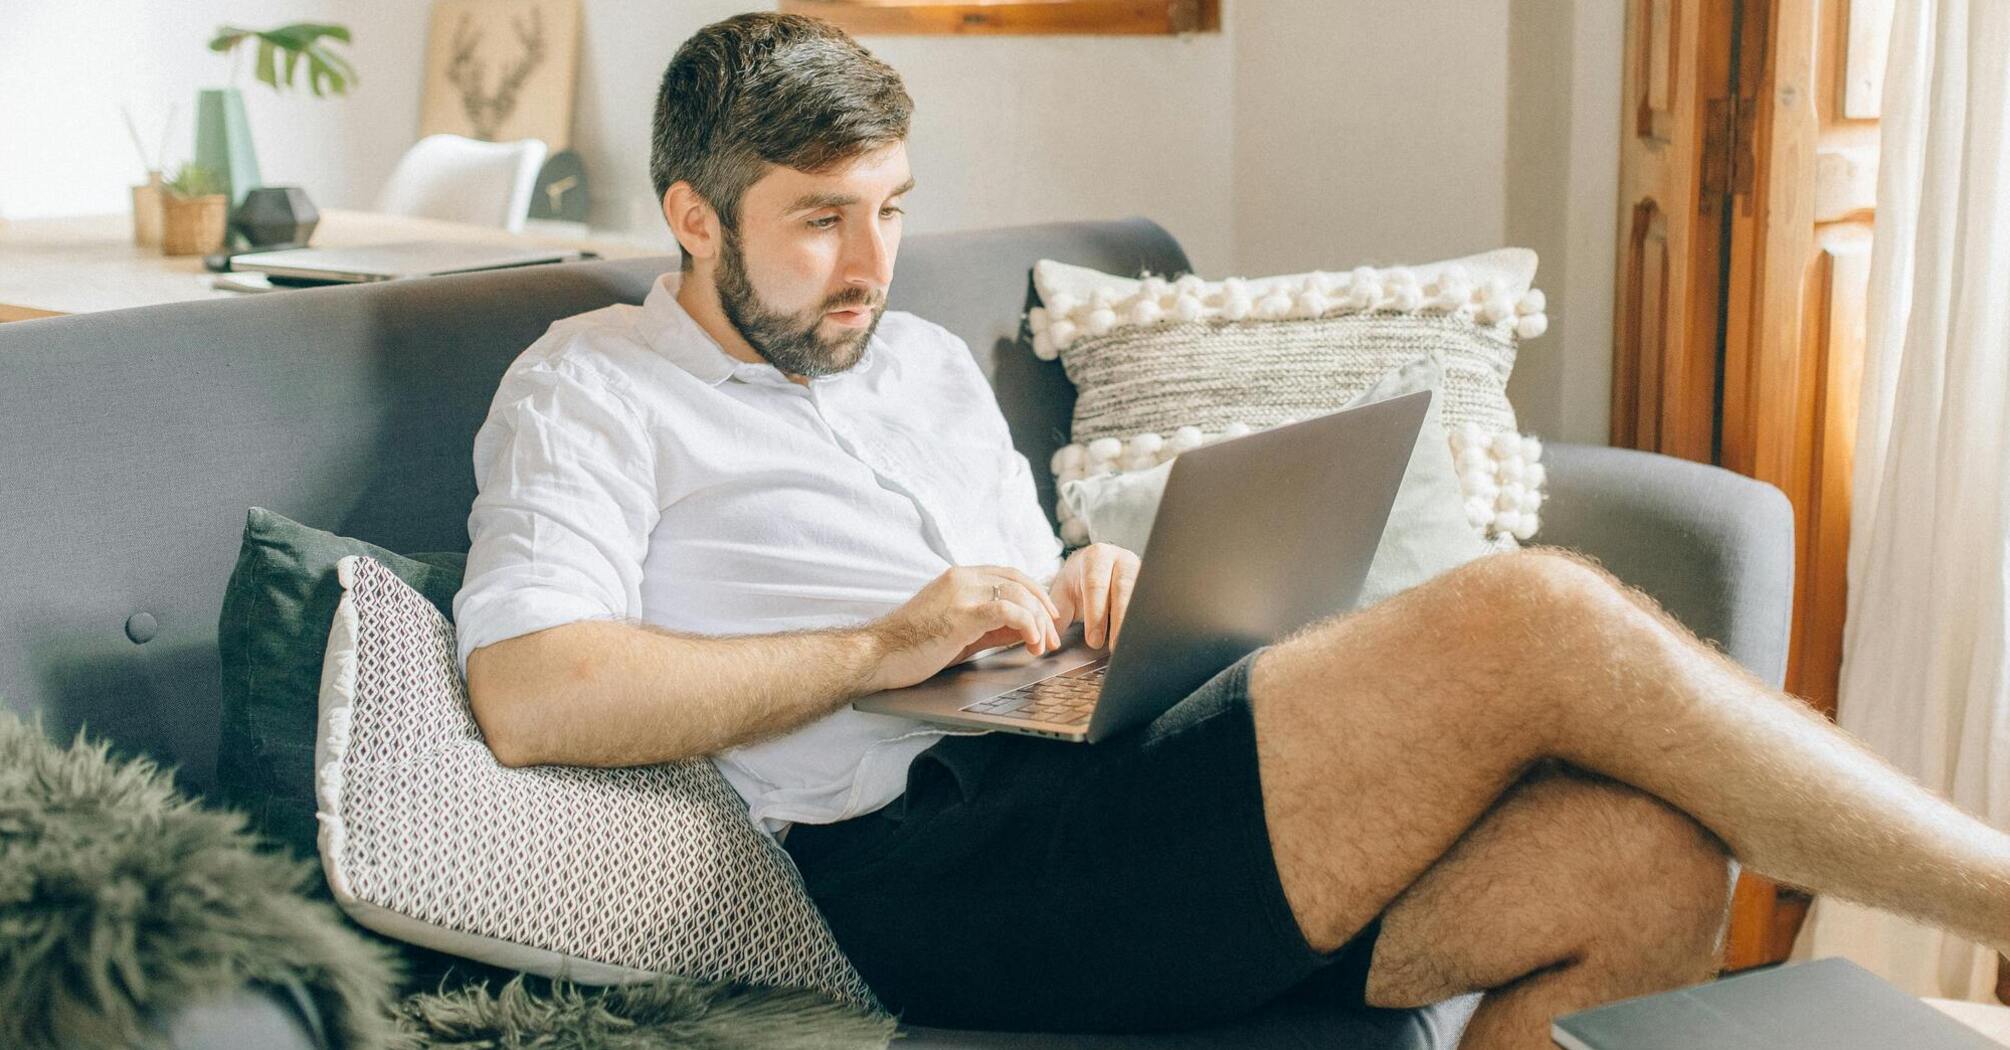 Pros and cons of working at home or in the office